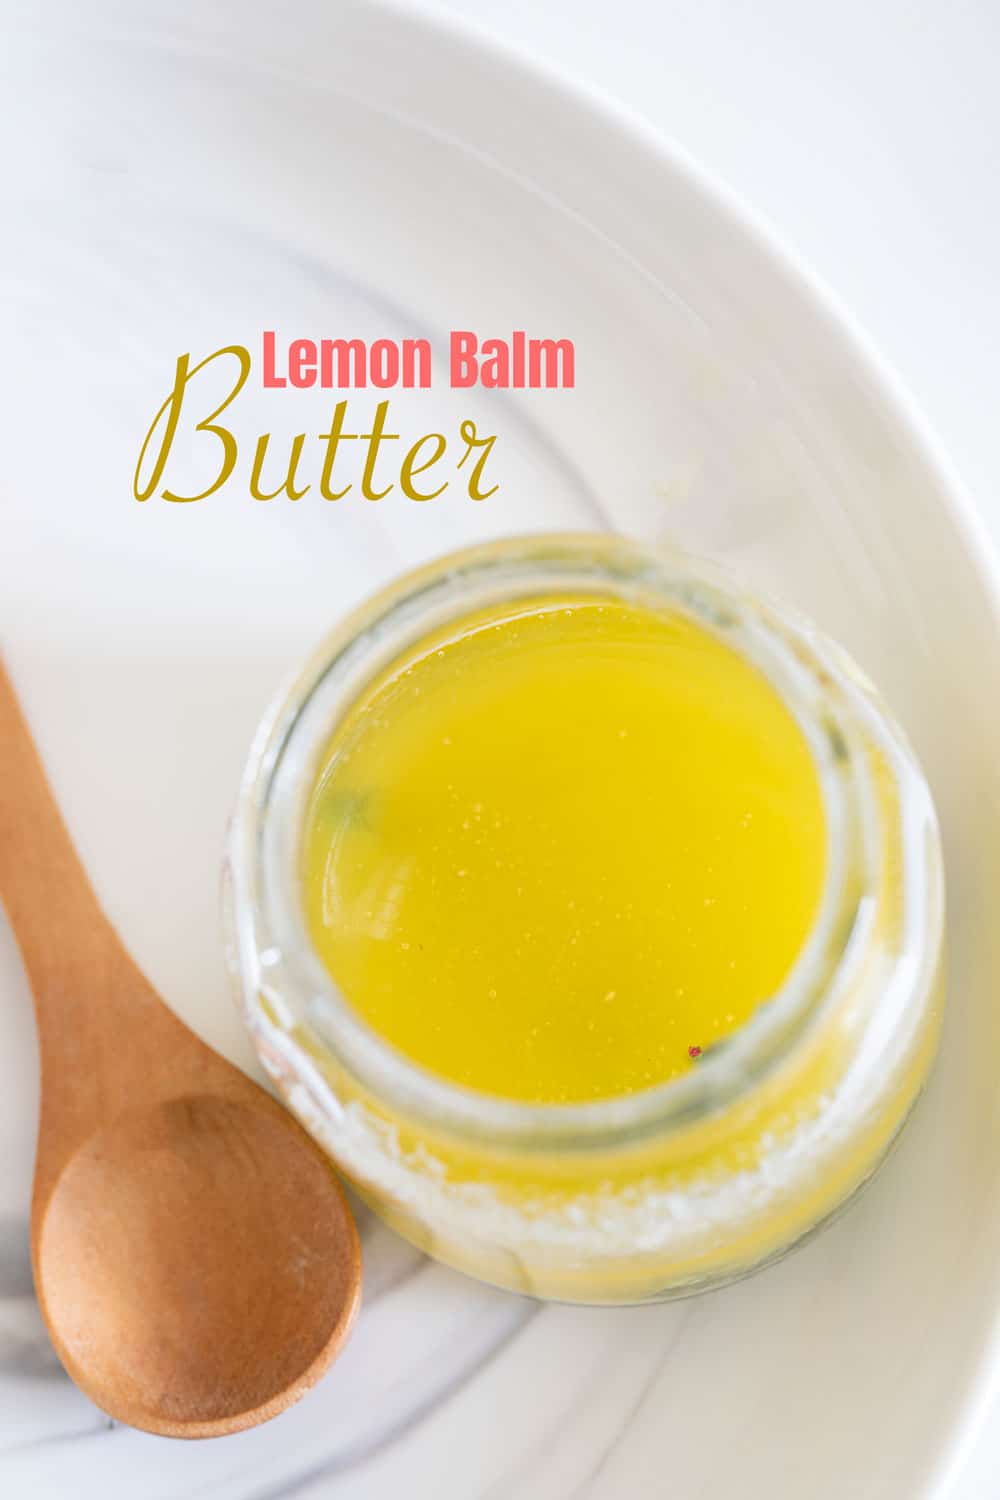 Top view of a glass bottle filled with melted lemon balm butter and a wooden spoon next to the bottle.  List of compound butter recipes.